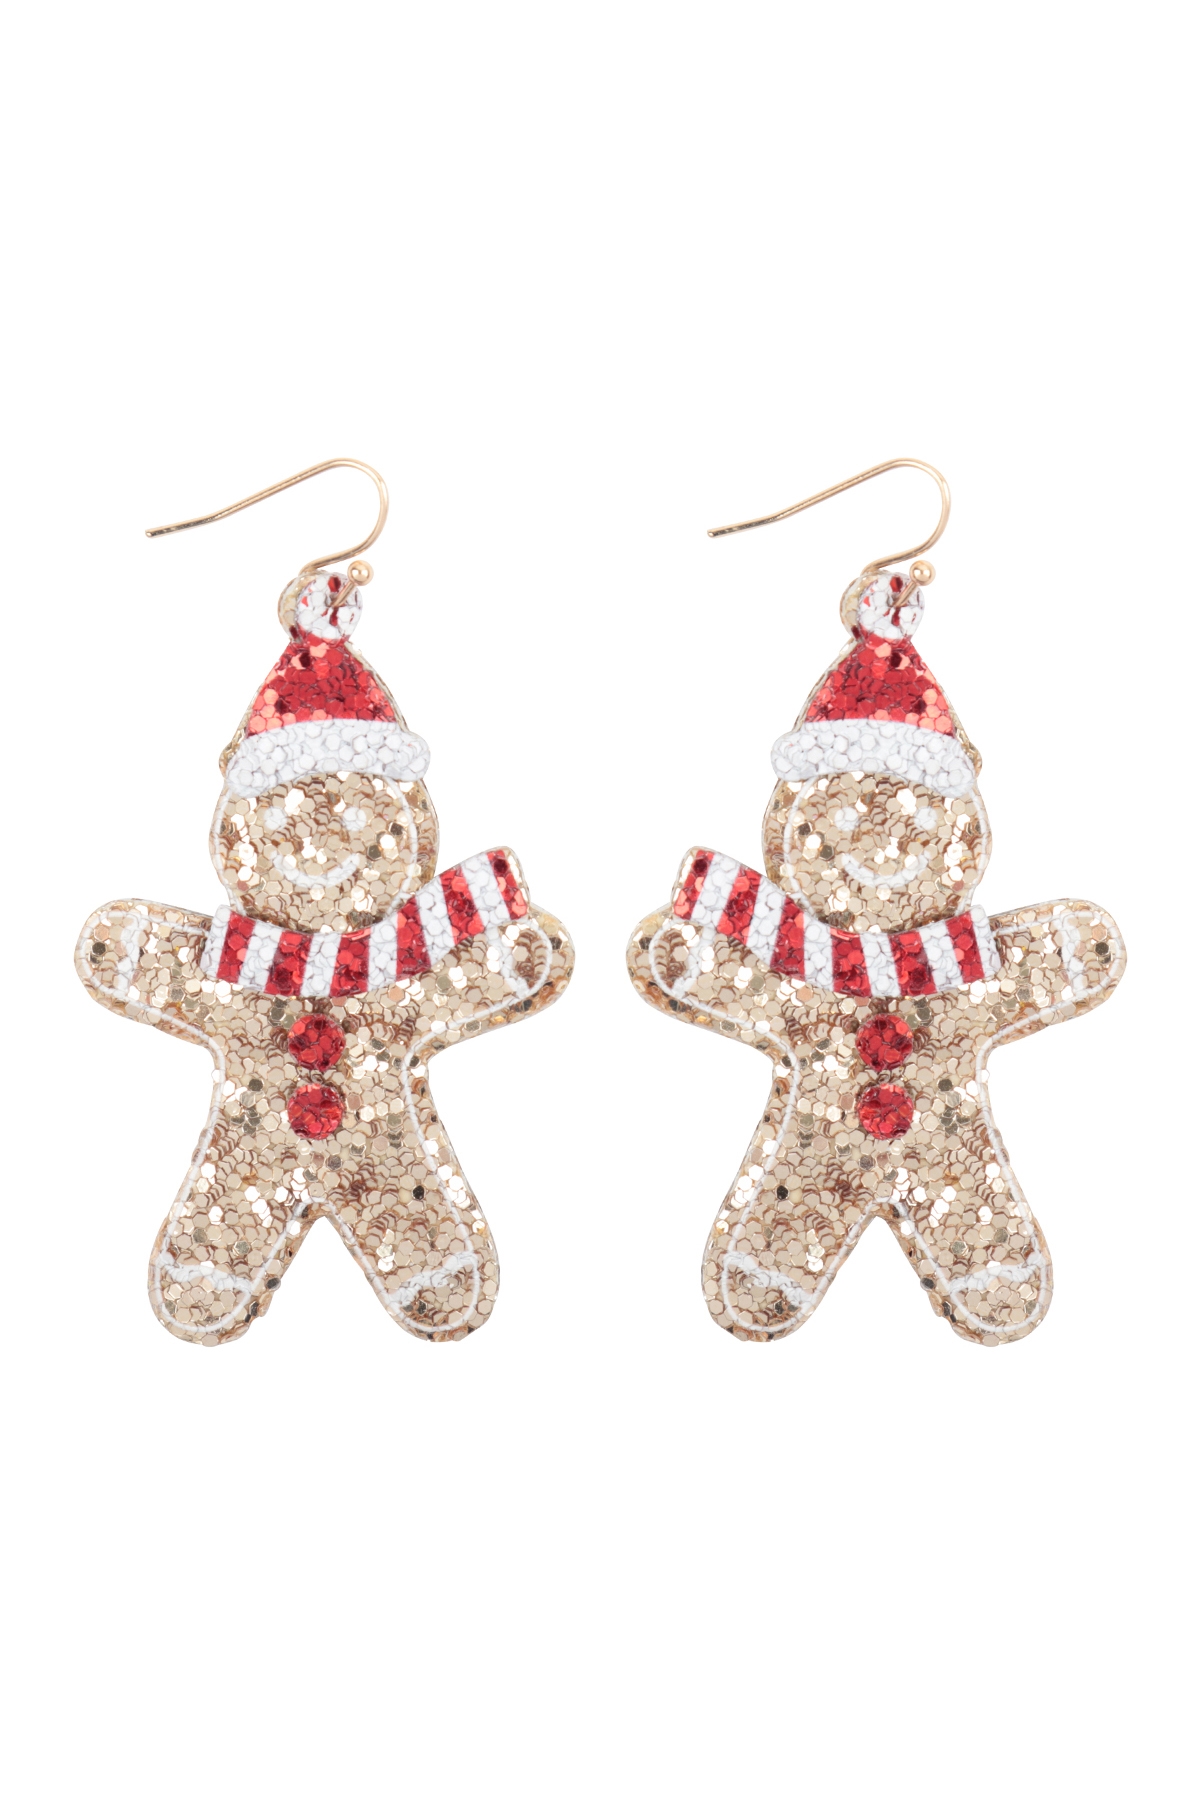 S1-8-3-ME20375GD - GINGER COOKIE GLITTER FISH HOOK EARRINGS-GOLD/1PC